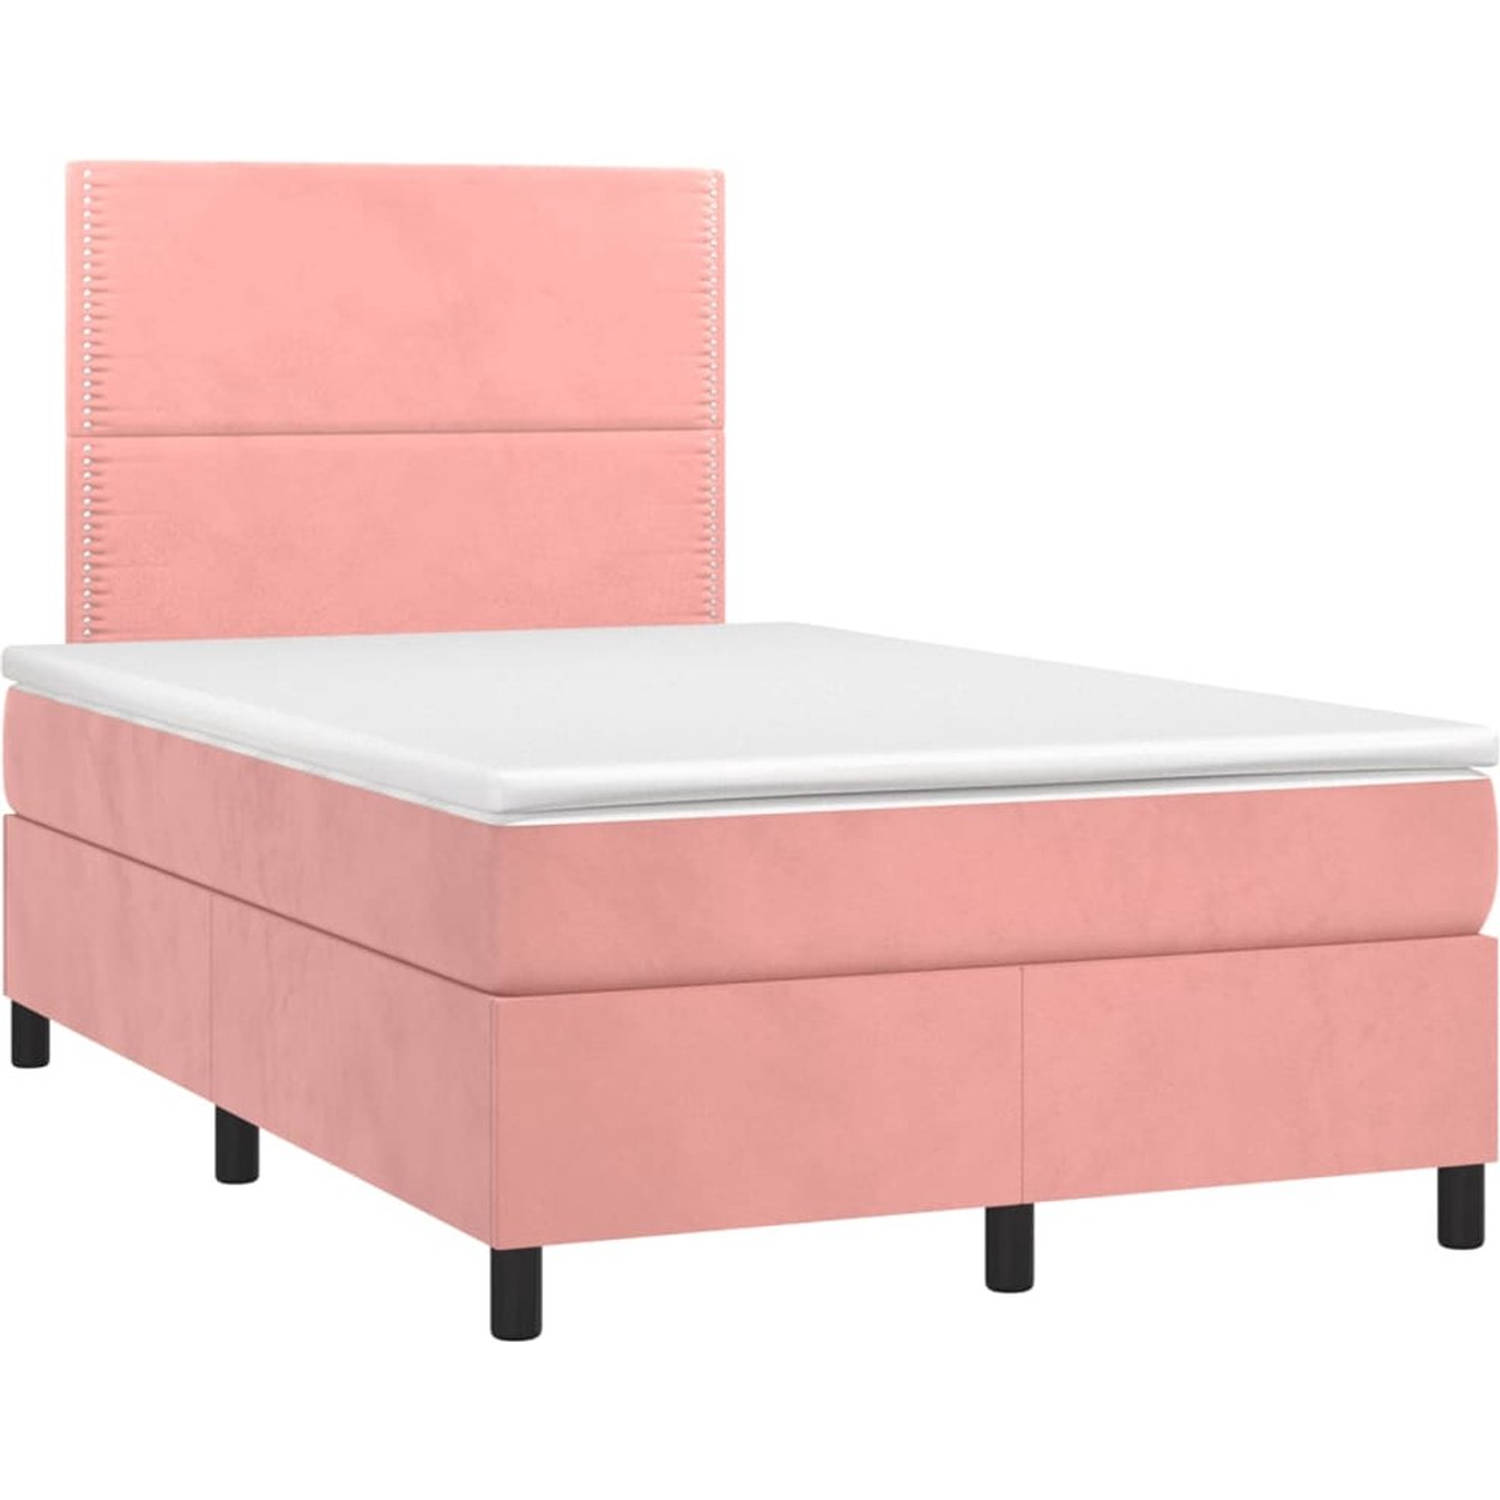 The Living Store Boxspringbed - Roze - 203 x 120 x 118/128 cm - Fluweel - Pocketvering